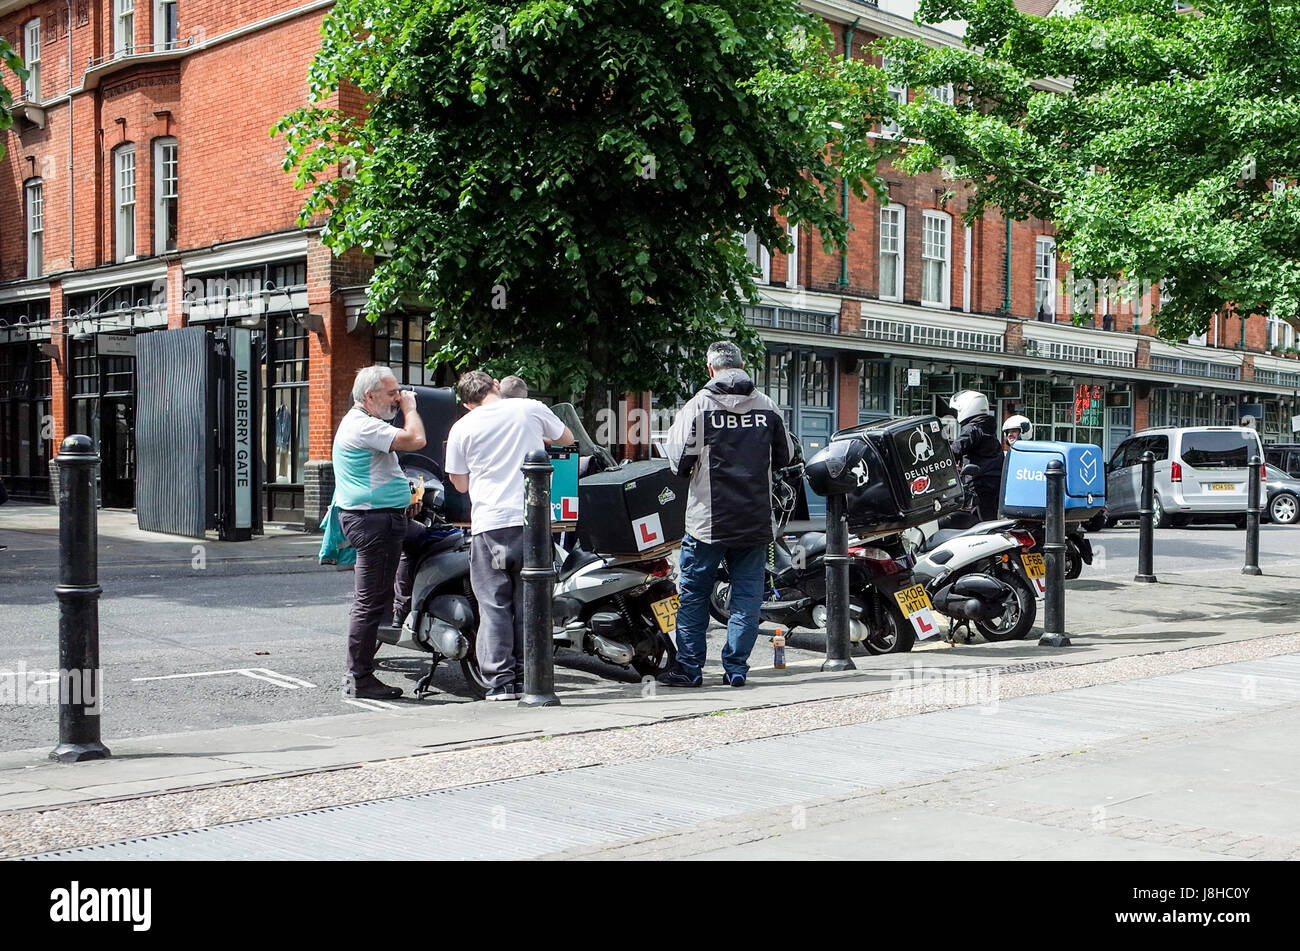 Deliveroo, Uber Eats and Stuart food delivery couriers chat while waiting for customer delivery requests. Stock Photo